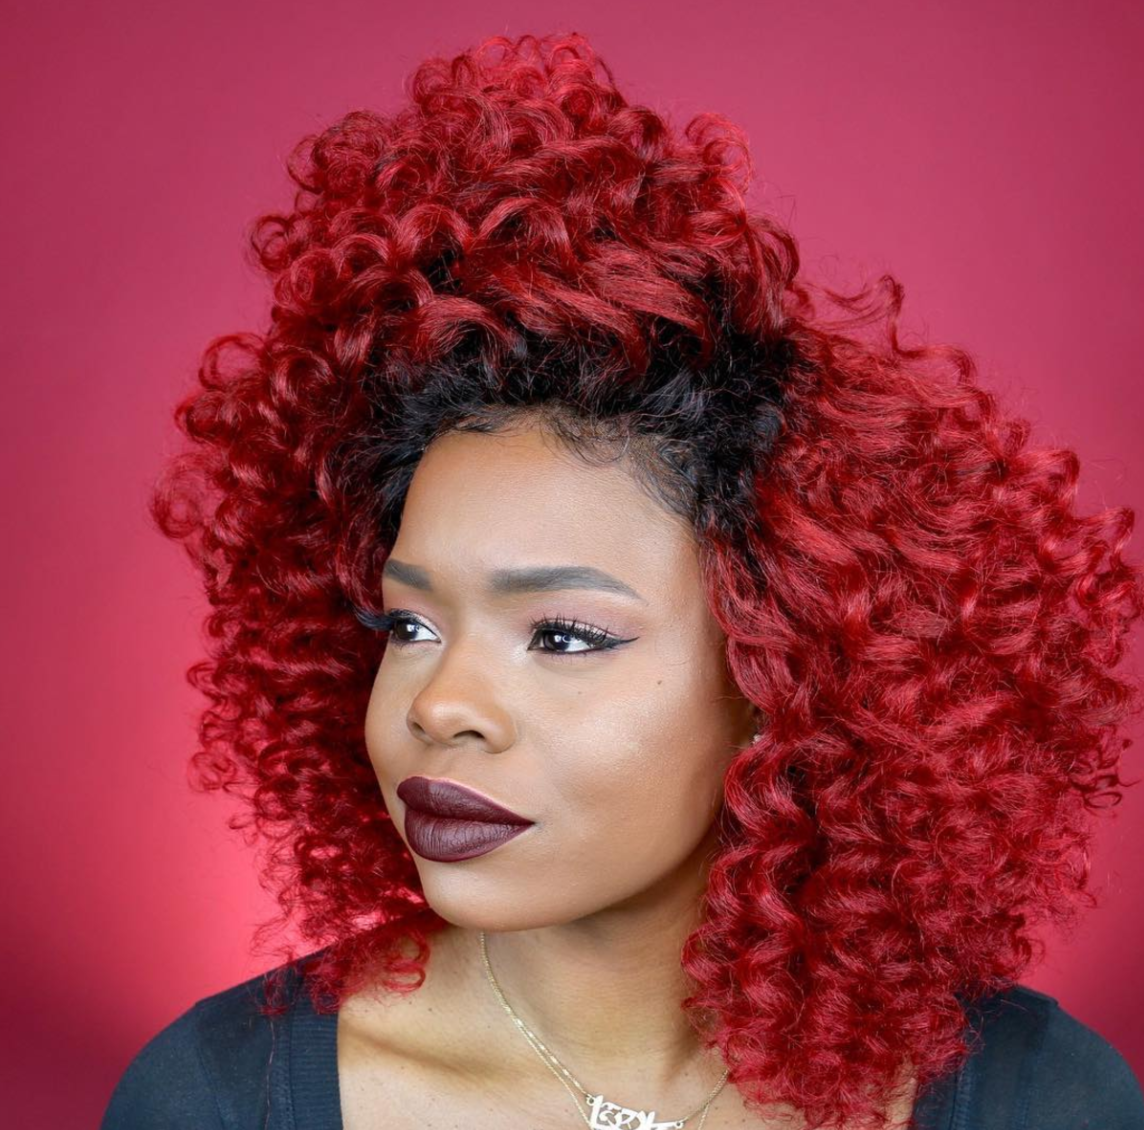 28 HQ Images Red Hair Color On Black Women : 16 Famous Black Women With Red Hair Who Looked Absolutely Amazing Revelist